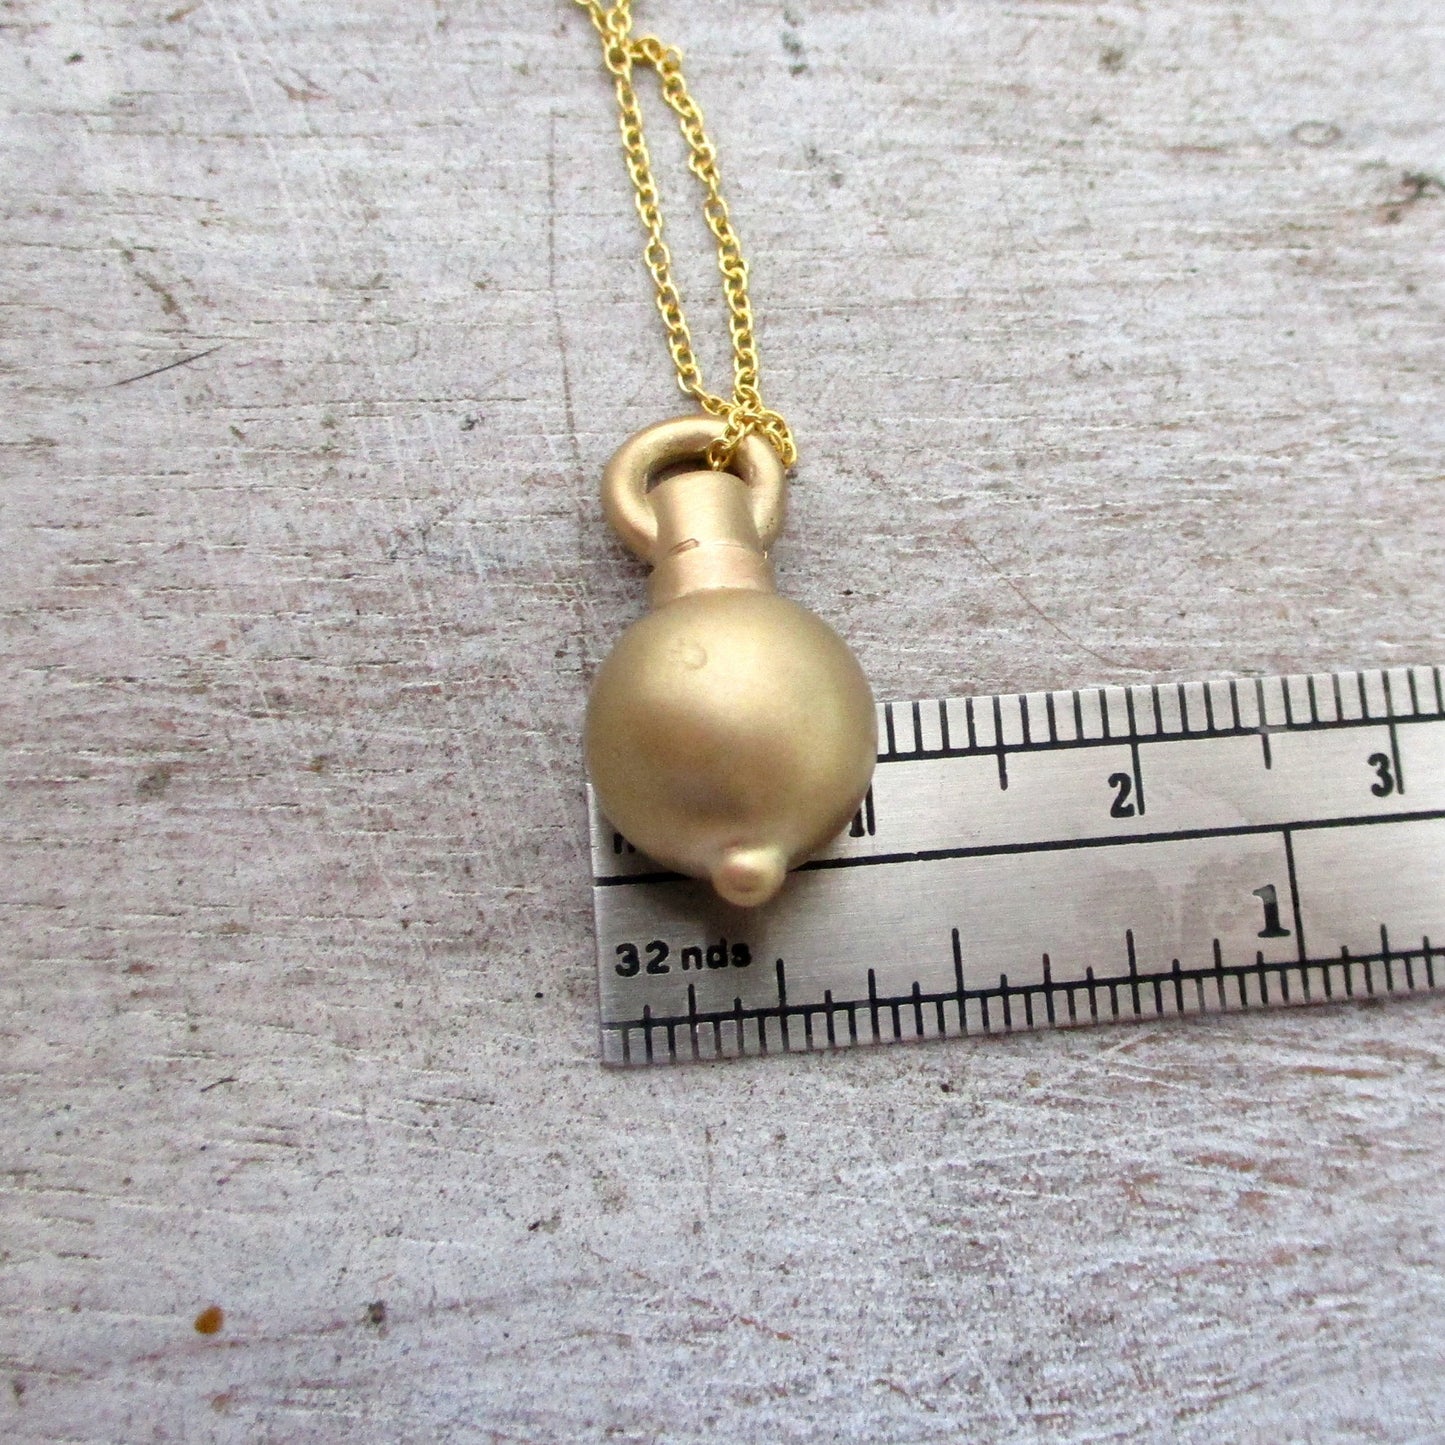 Load image into Gallery viewer, 14K Gold 10mm Sphere Pendant for Cremation Ashes, Memorial Urn for Ashes, Cremation Urn Pendant Necklace, Holds Human or Pet Ashes, Gold Urn
